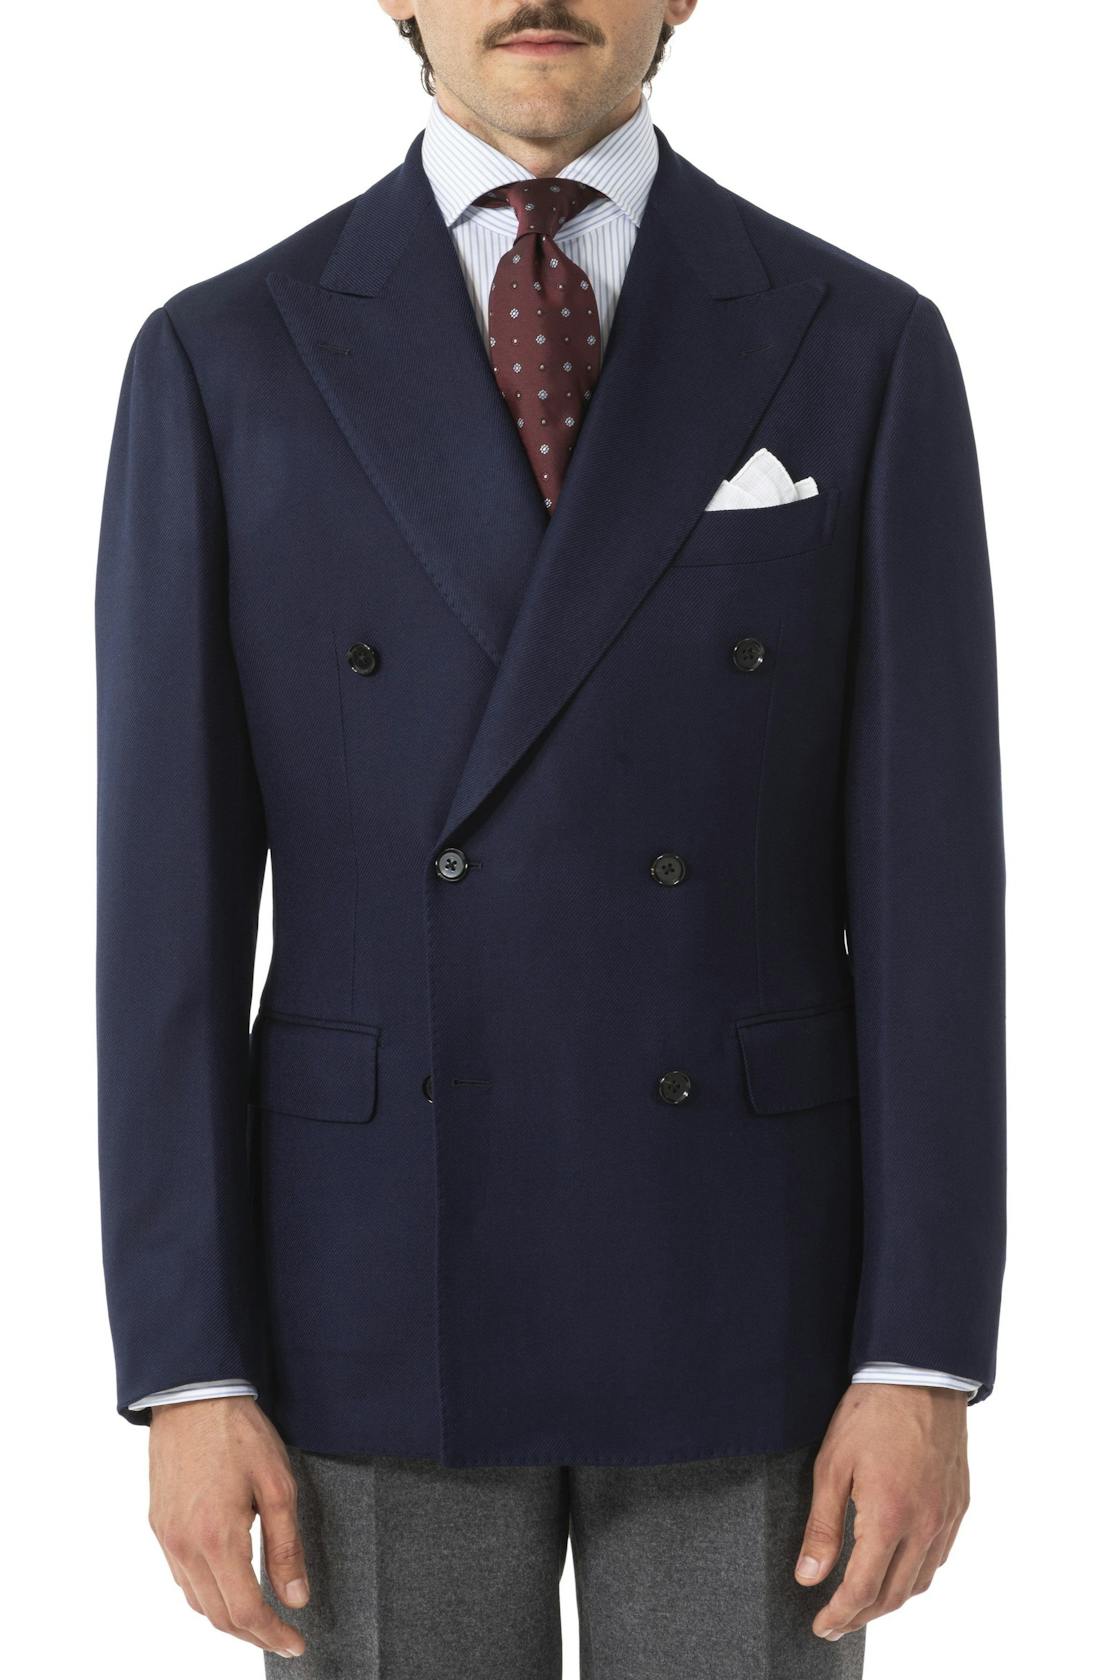 The Armoury by Ring Jacket Model 6 Navy Wool Twill Sport Coat